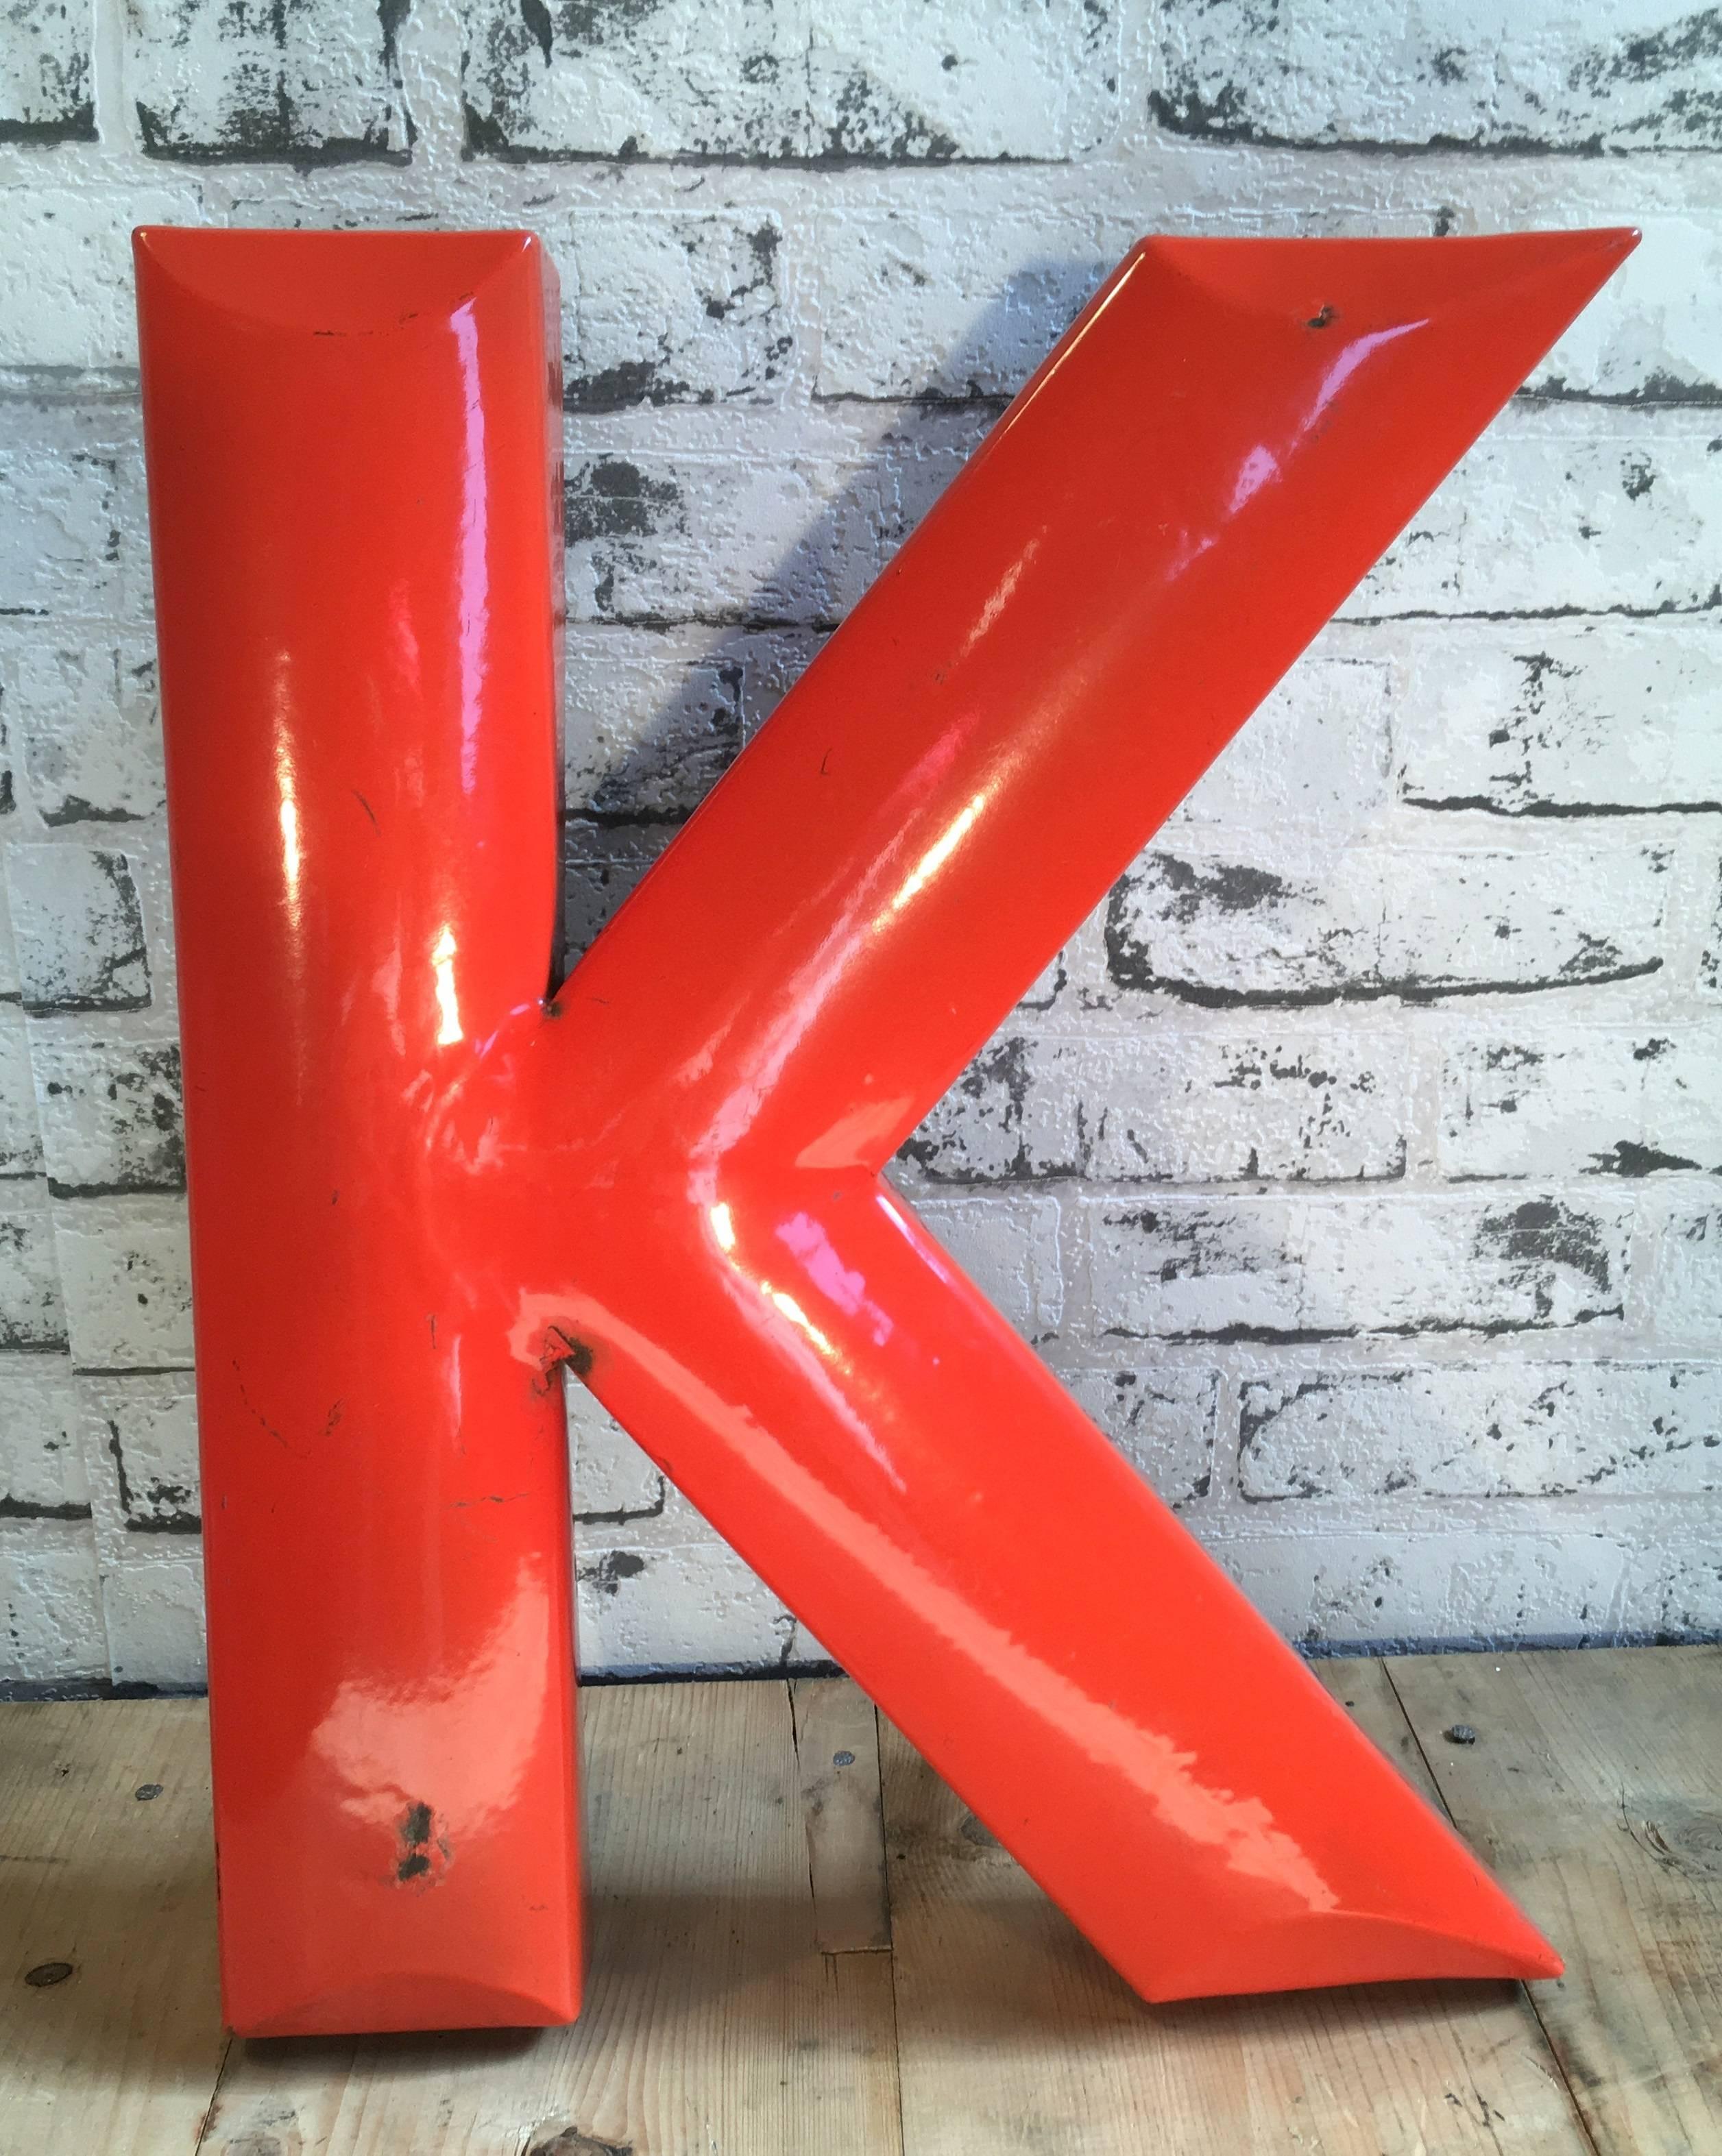 This industrial vintage letter 'K' was manufactured in former Czechoslovakia, 1930s.Comes from an old advertisement.
Letter is made from enameled iron.